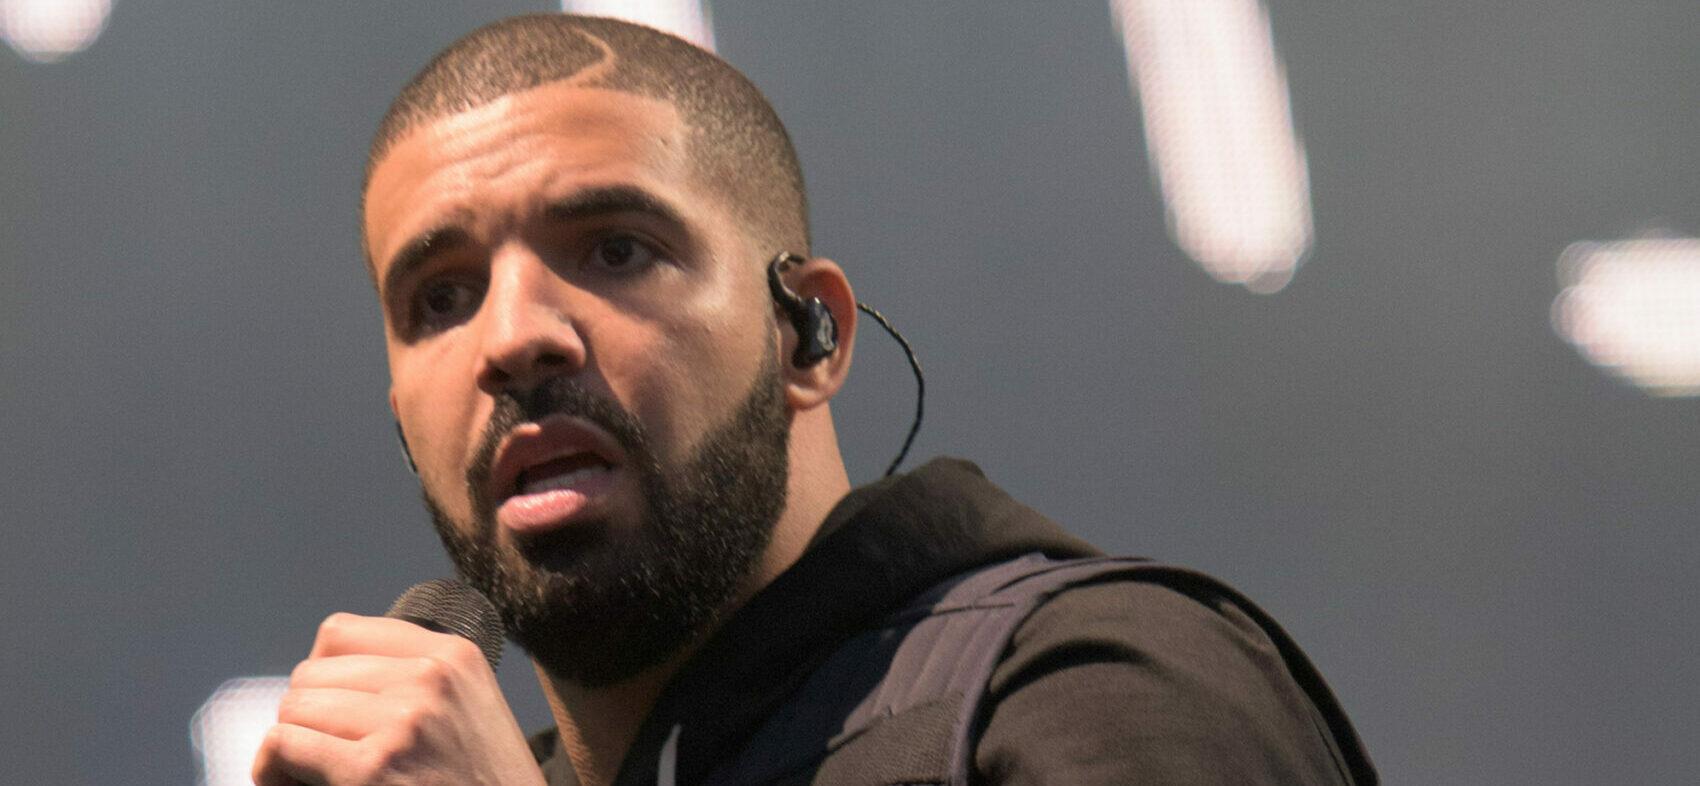 Drake Warns Fan Who Hurled Book While He Performed On Stage